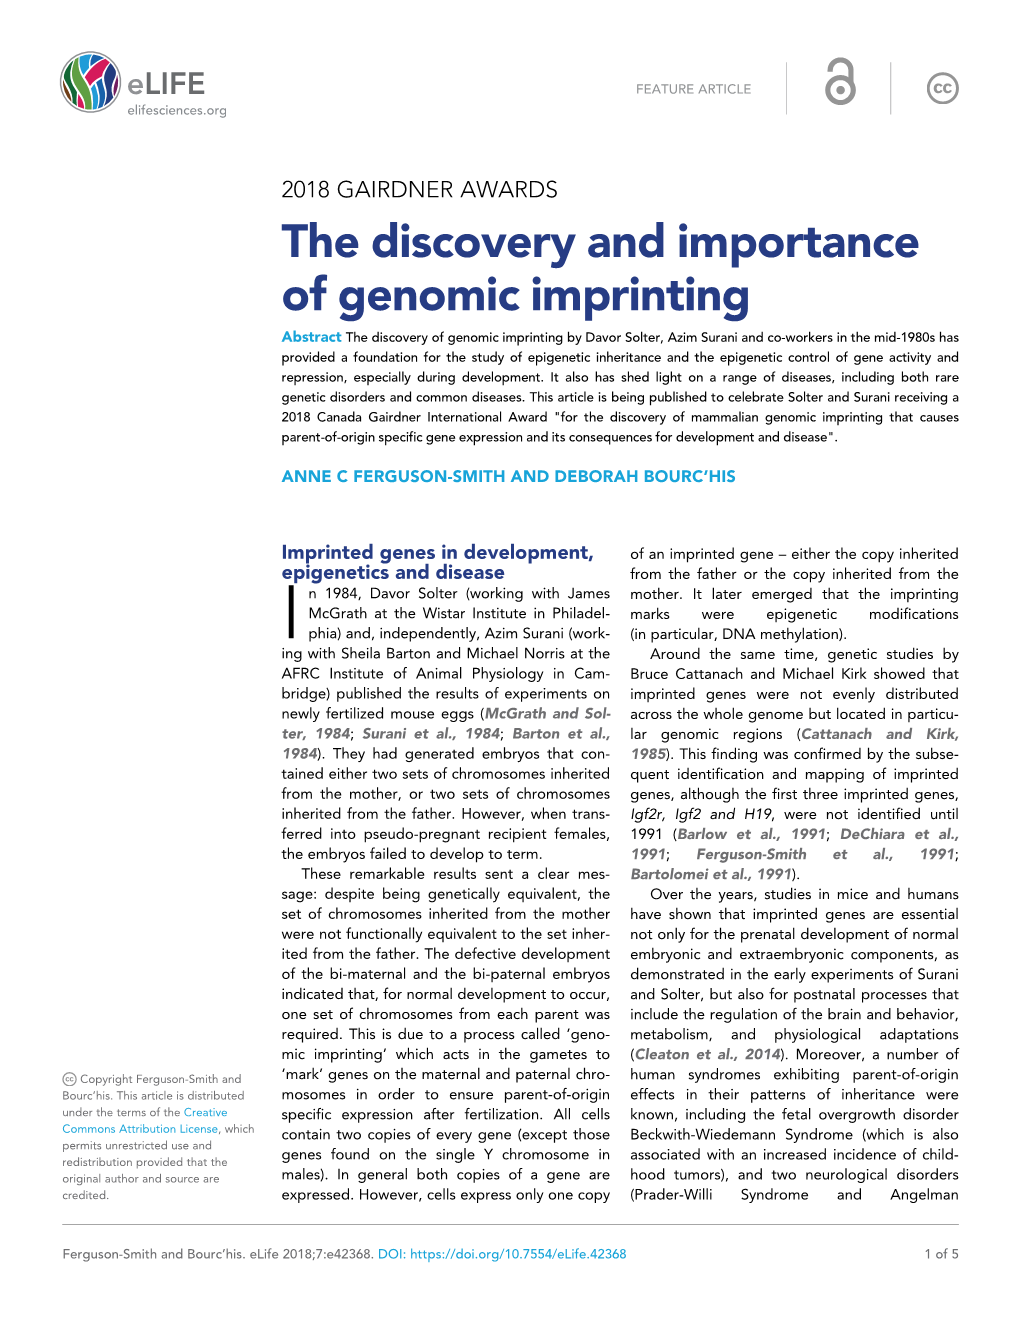 The Discovery and Importance of Genomic Imprinting